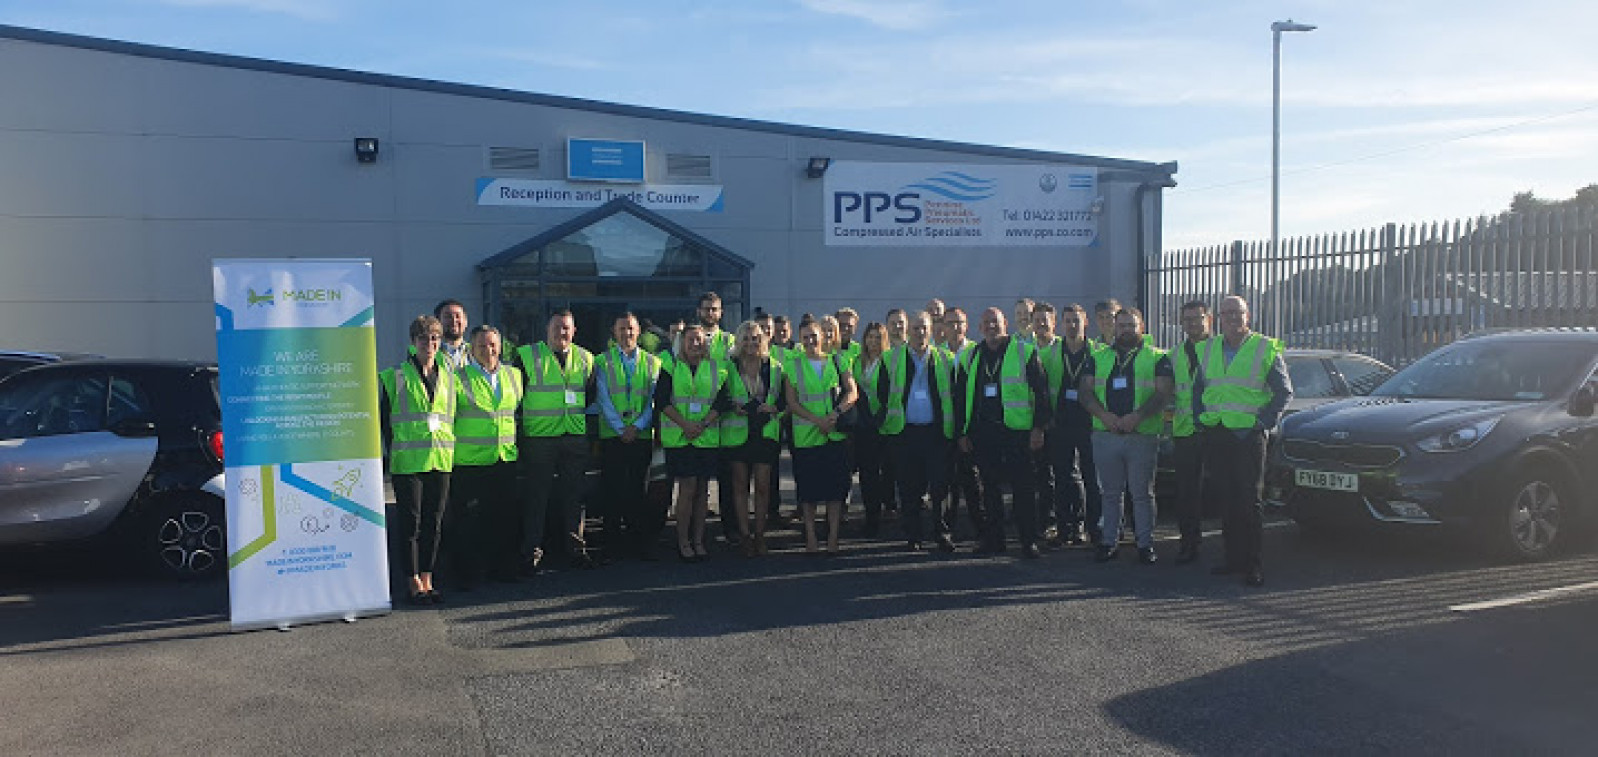 Have a look: Best Practice Networking Event at Pennine Pneumatic Services